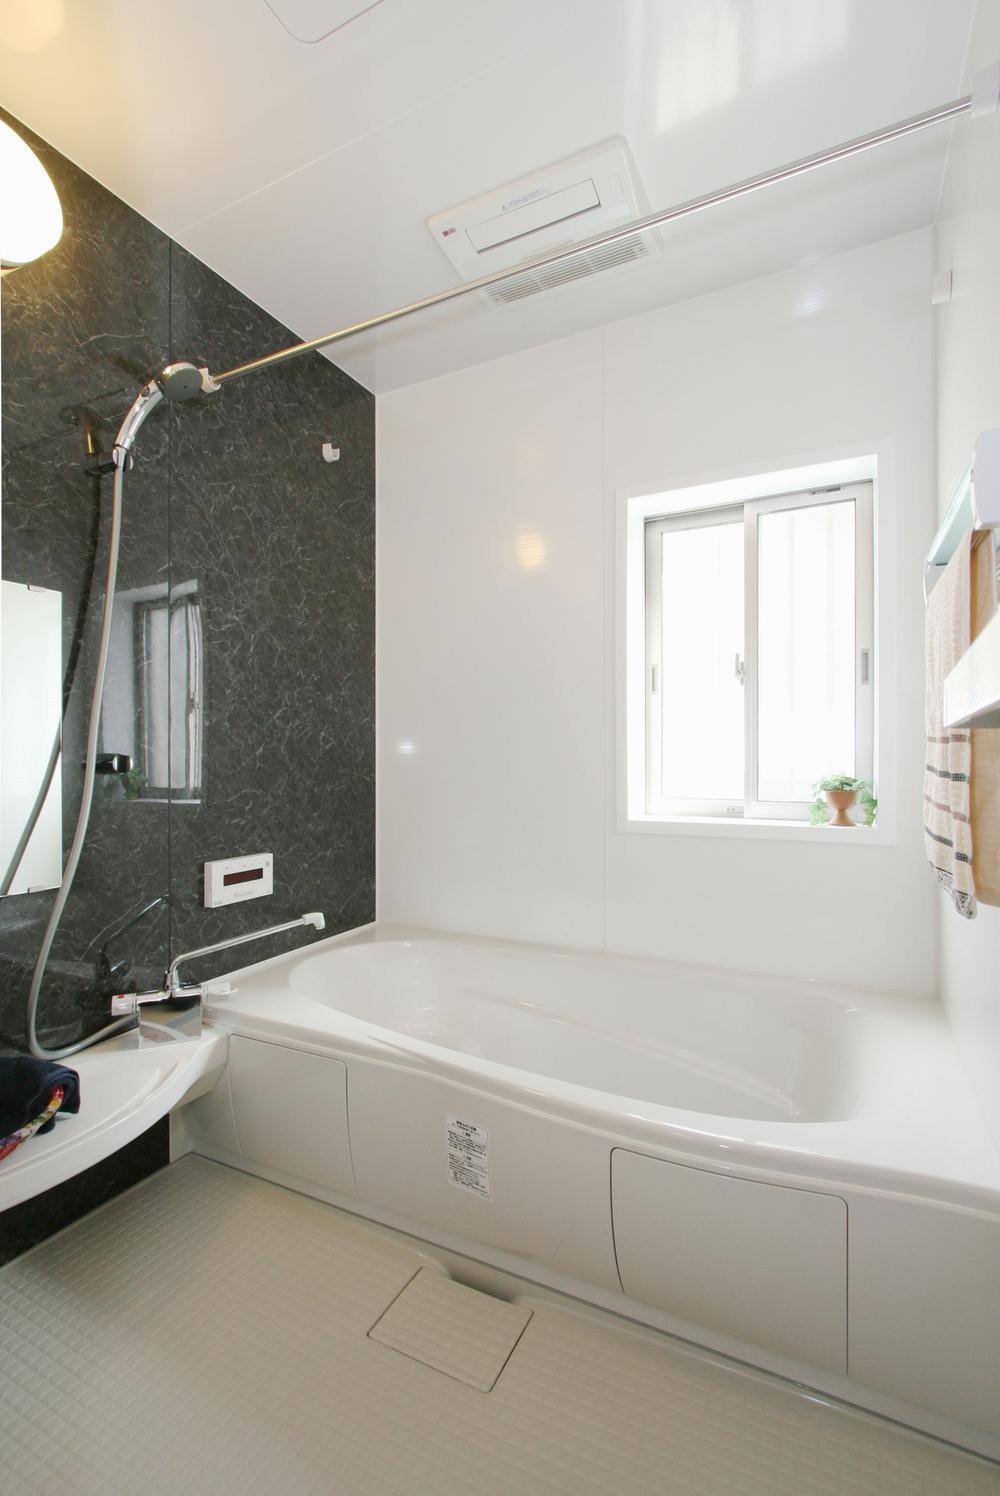 Same specifications photo (bathroom). Relax in the 1 pyeong type of bathroom